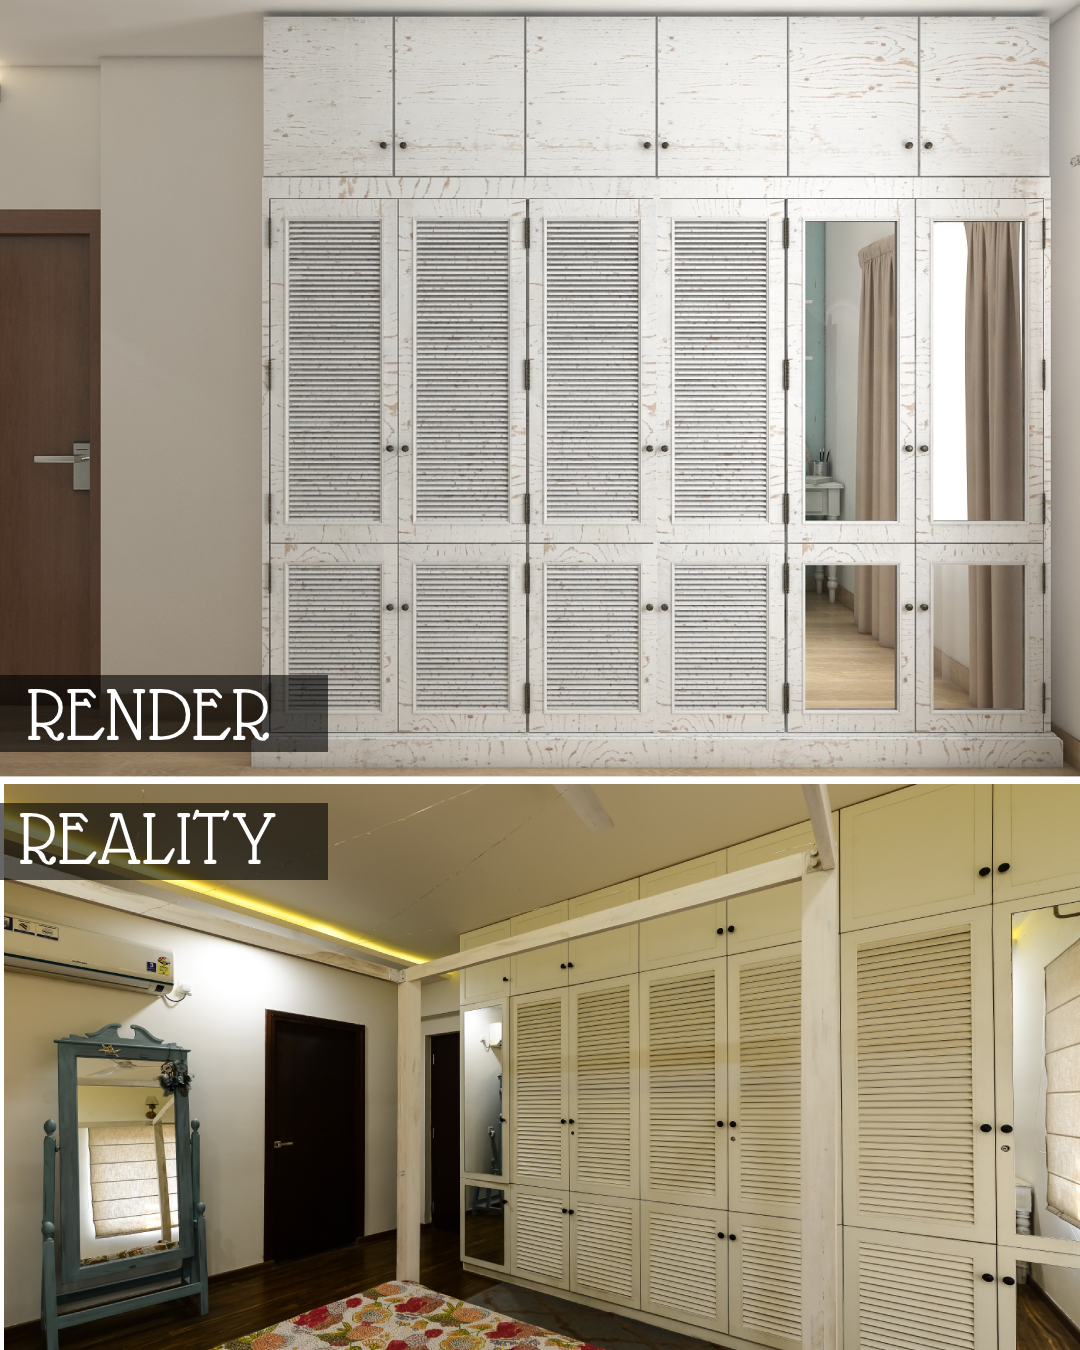 From Rendering to Reality: A Look into our Interior Design Process